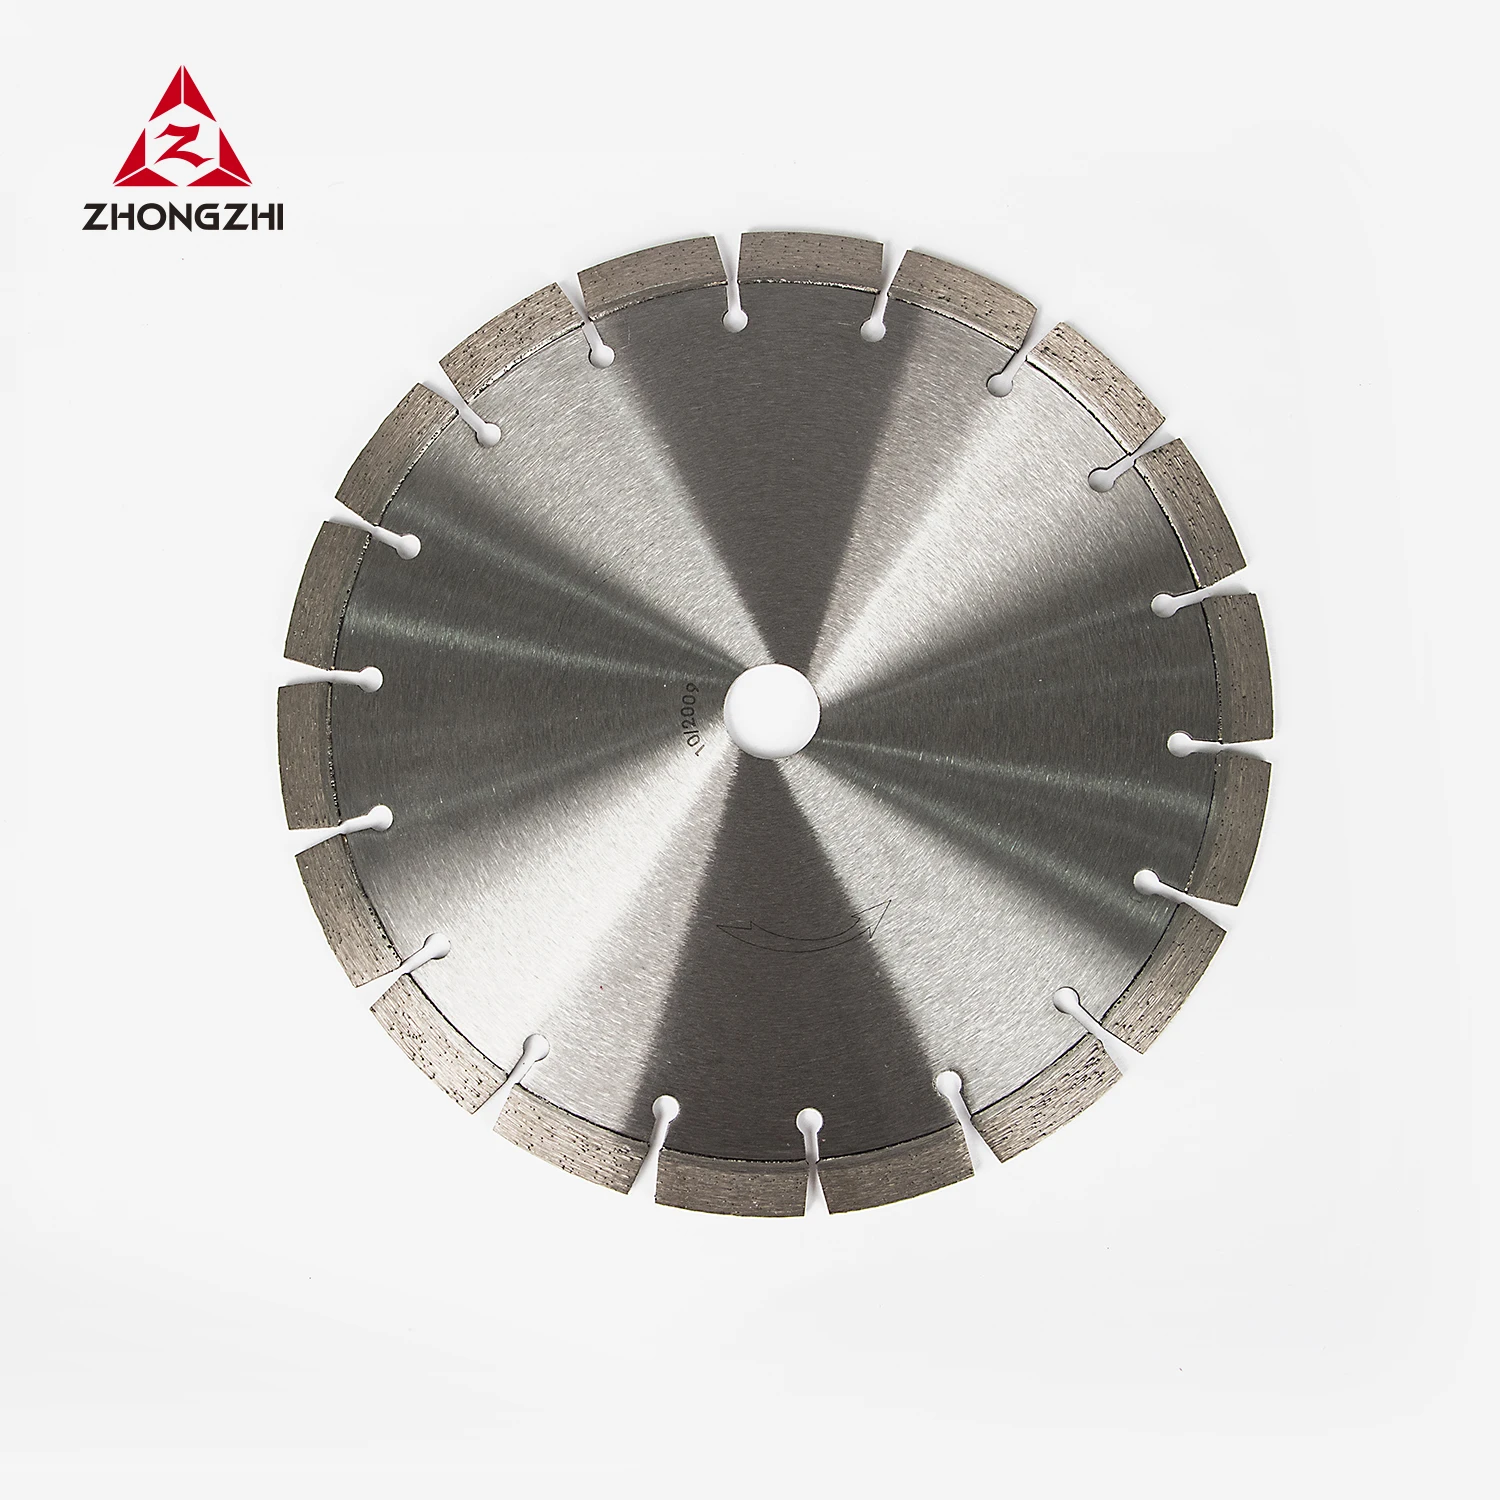 

230mm Hot Pressed Sintered Segmented Diamond Dry Cutters Blade for Granite Natural Stones, Upon request